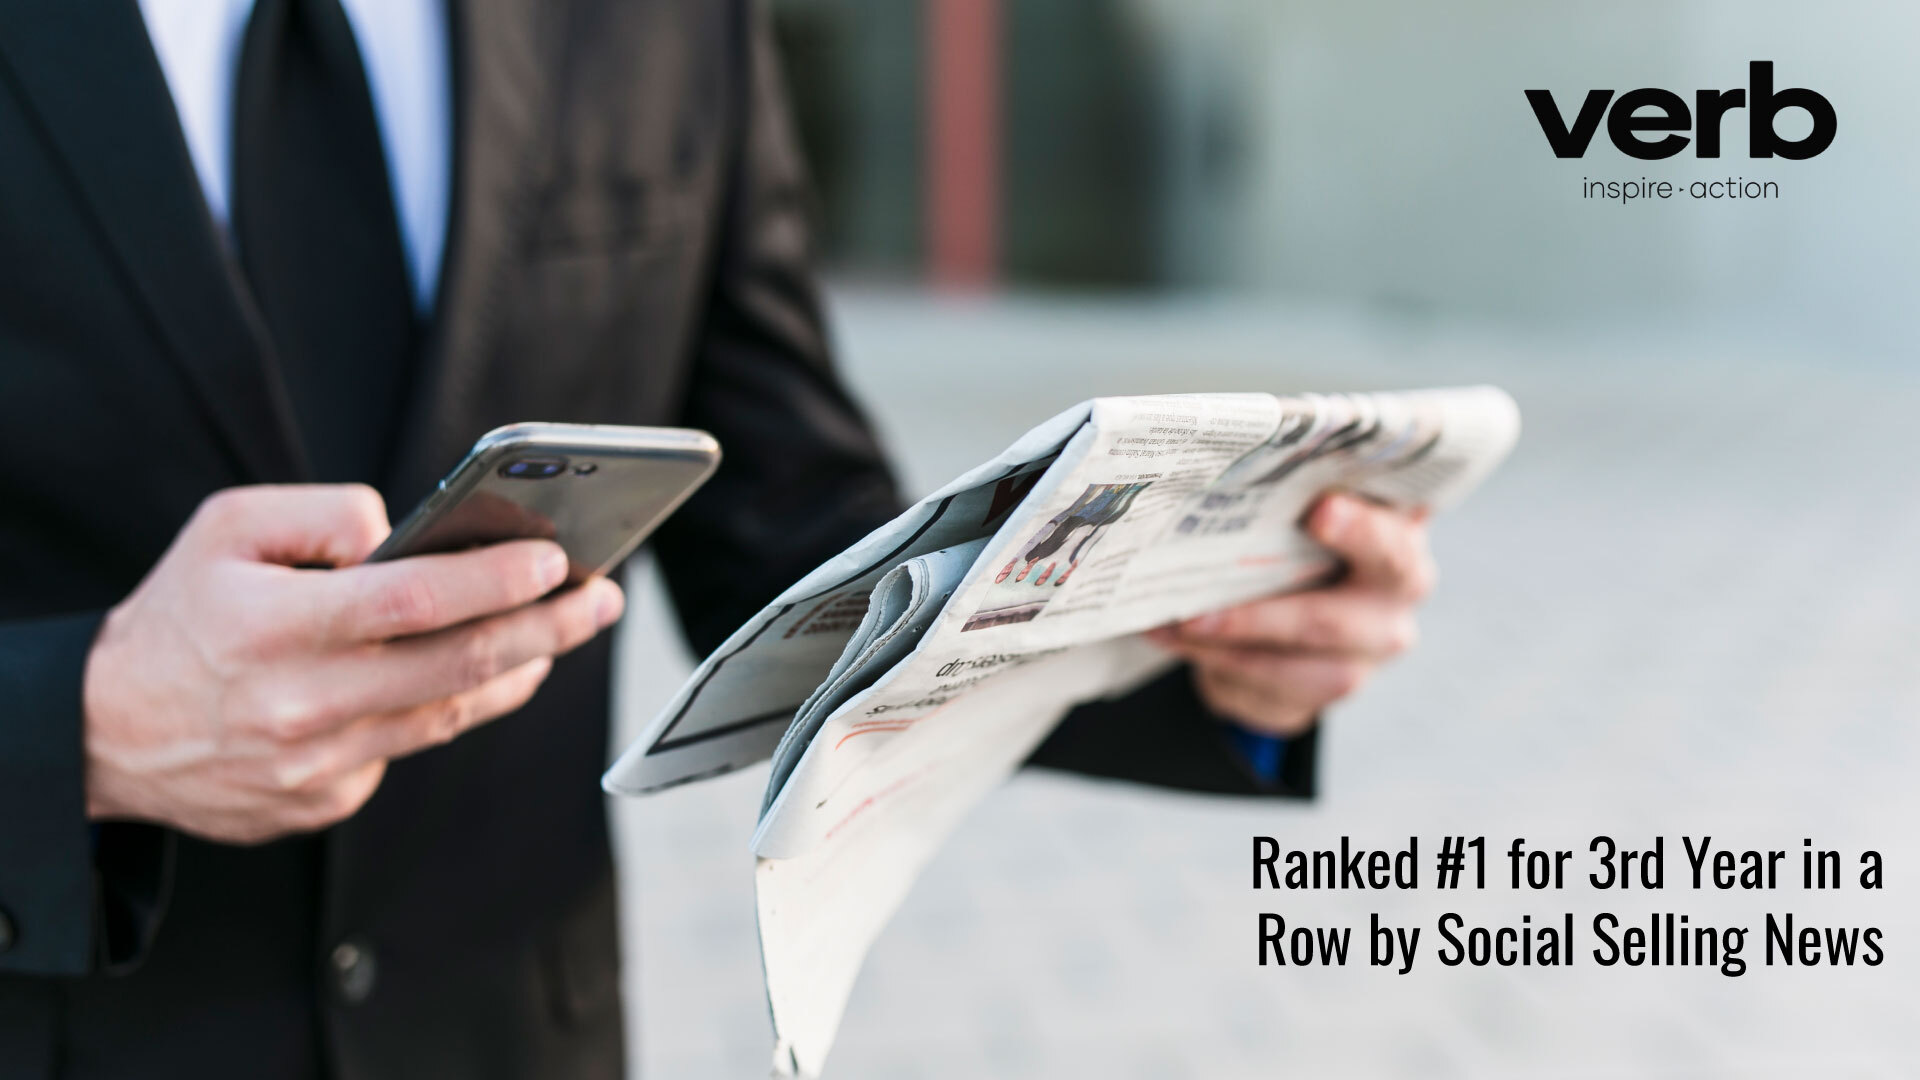 VERB Ranked #1 for 3rd Year in a Row by Social Selling News’ Rankings for Direct Selling Apps